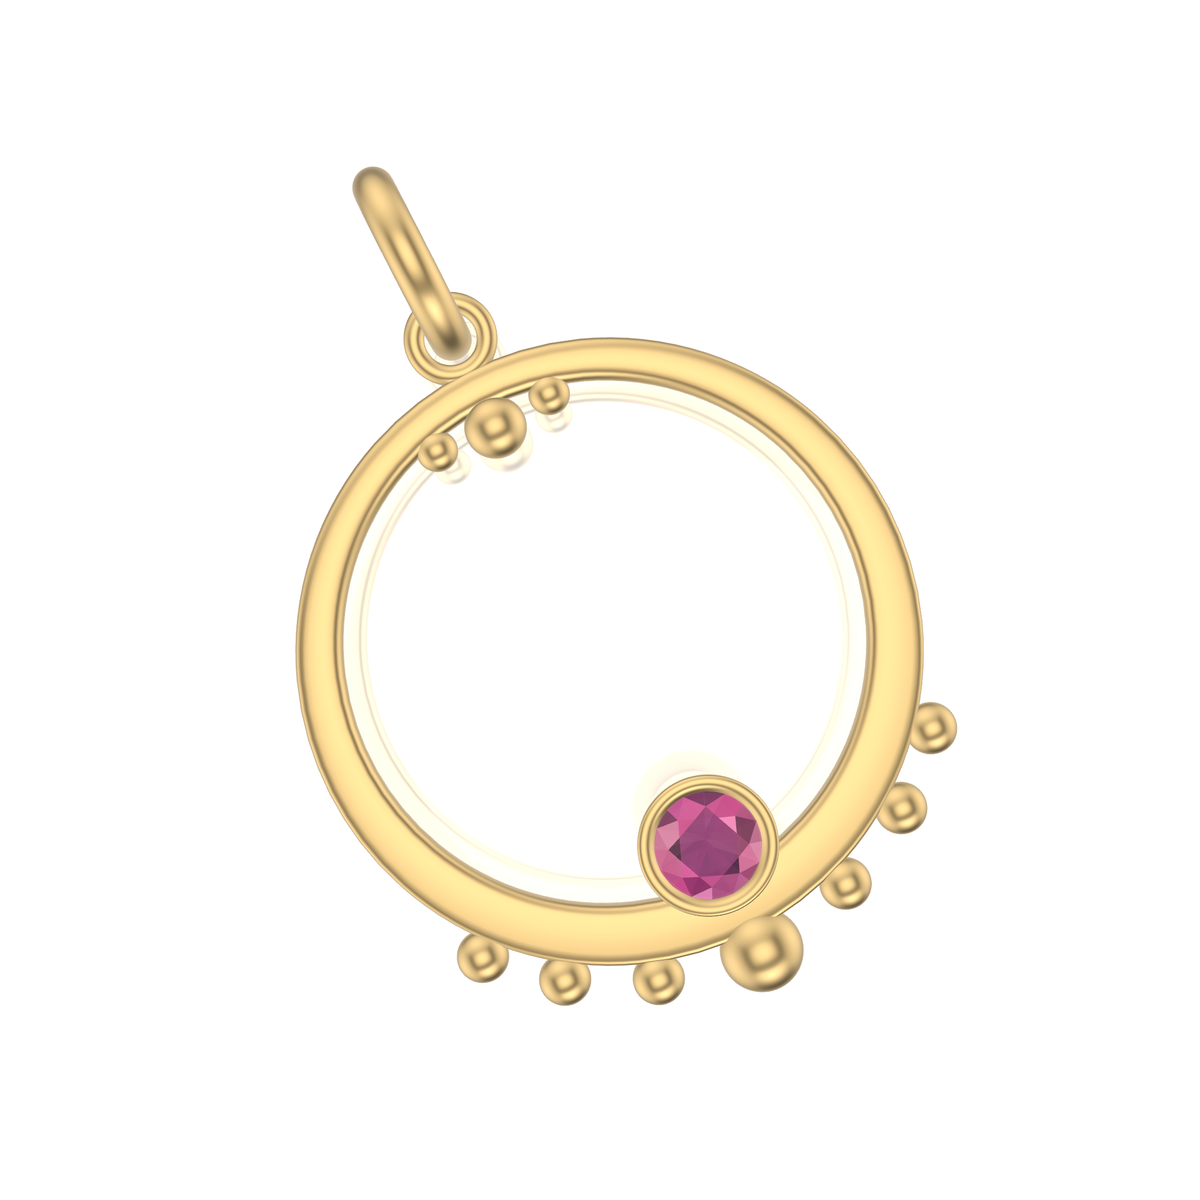 Mothers Circle Framed Charm | Gold Pendant With Granules, Large | Choose Your Metal And Gemstones